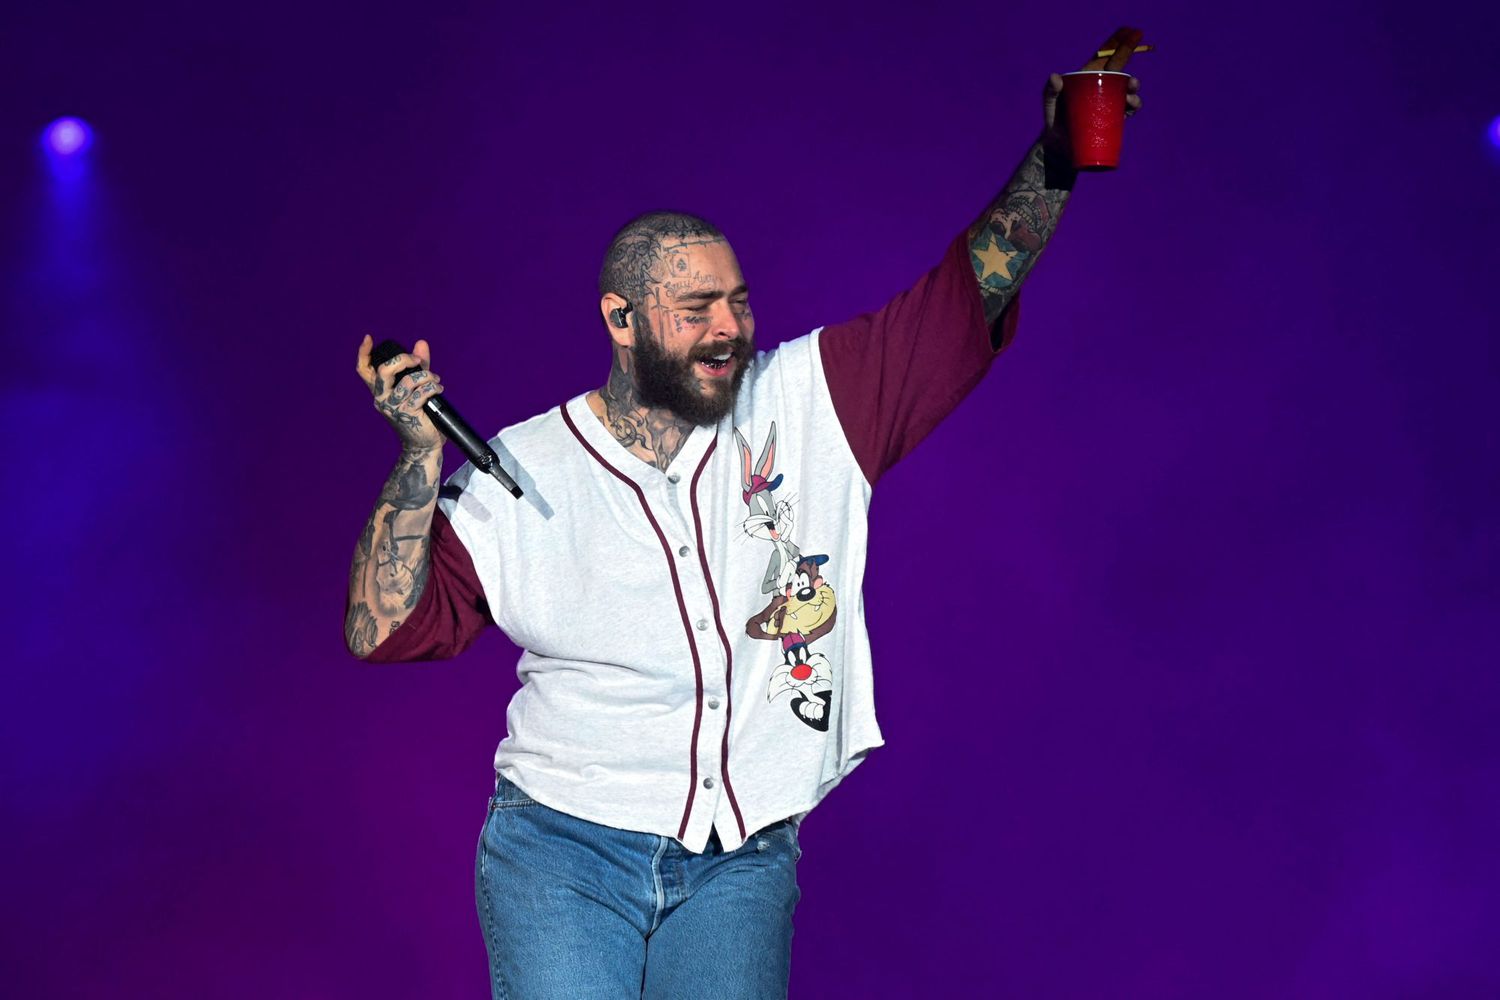 US rapper Post Malone performs on the Main stage of the Rock in Rio music festival at the Olympic Park in Rio de Janeiro, Brazil, on September 4, 2022. - The Rock in Rio megafestival shakes up the city of Rio de Janeiro again starting this Friday after a three-year break due to the Coronavirus pandemic, with names like Justin Bieber, Dua Lipa and Coldplay among its principal attractions. (Photo by MAURO PIMENTEL / AFP) (Photo by MAURO PIMENTEL/AFP via Getty Images)